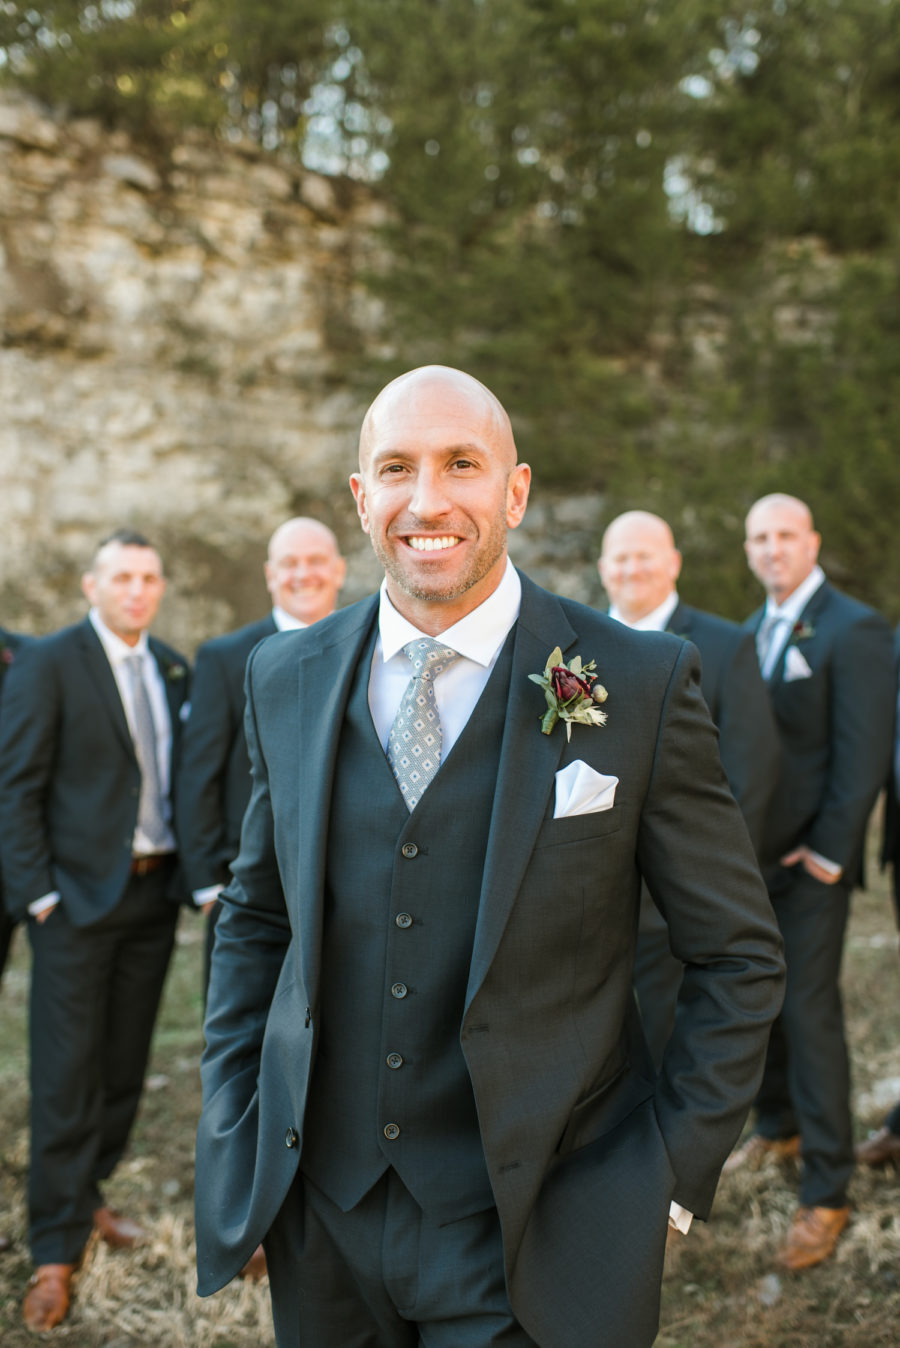 Grooms Portrait by Shelby Rae Photographs on Nashville Bride Guide